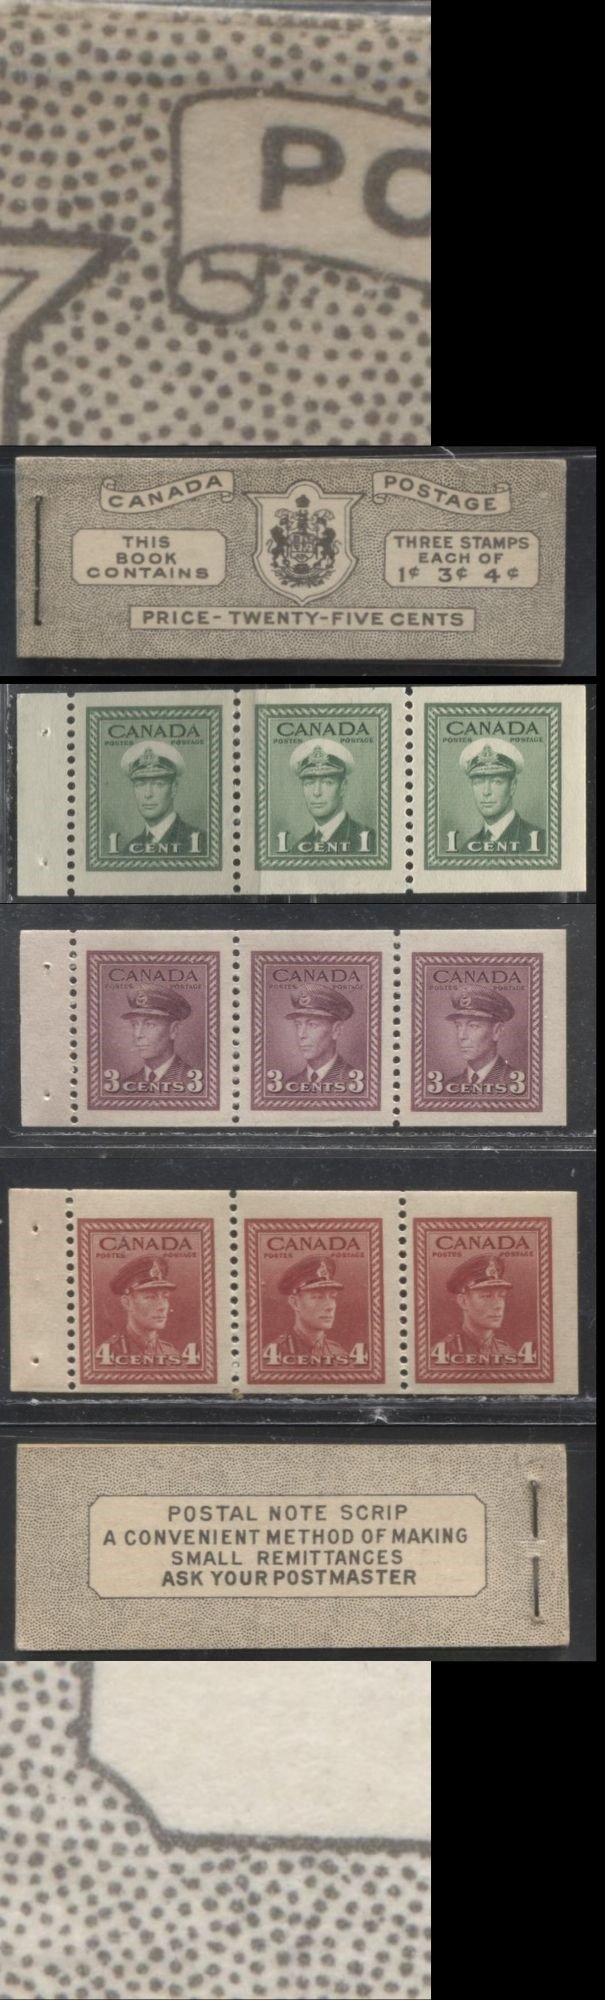 Lot 195 Canada #BK38a 1942-1949 War Issue Complete 25c, English Booklet Containing 1 Pane Each of 3 of 1c Green, 3c Rosy Plum and 4c Carmine Red, Harris Front Cover Type IVd , Back Cover Haiv, 7c & 6c Rate Page